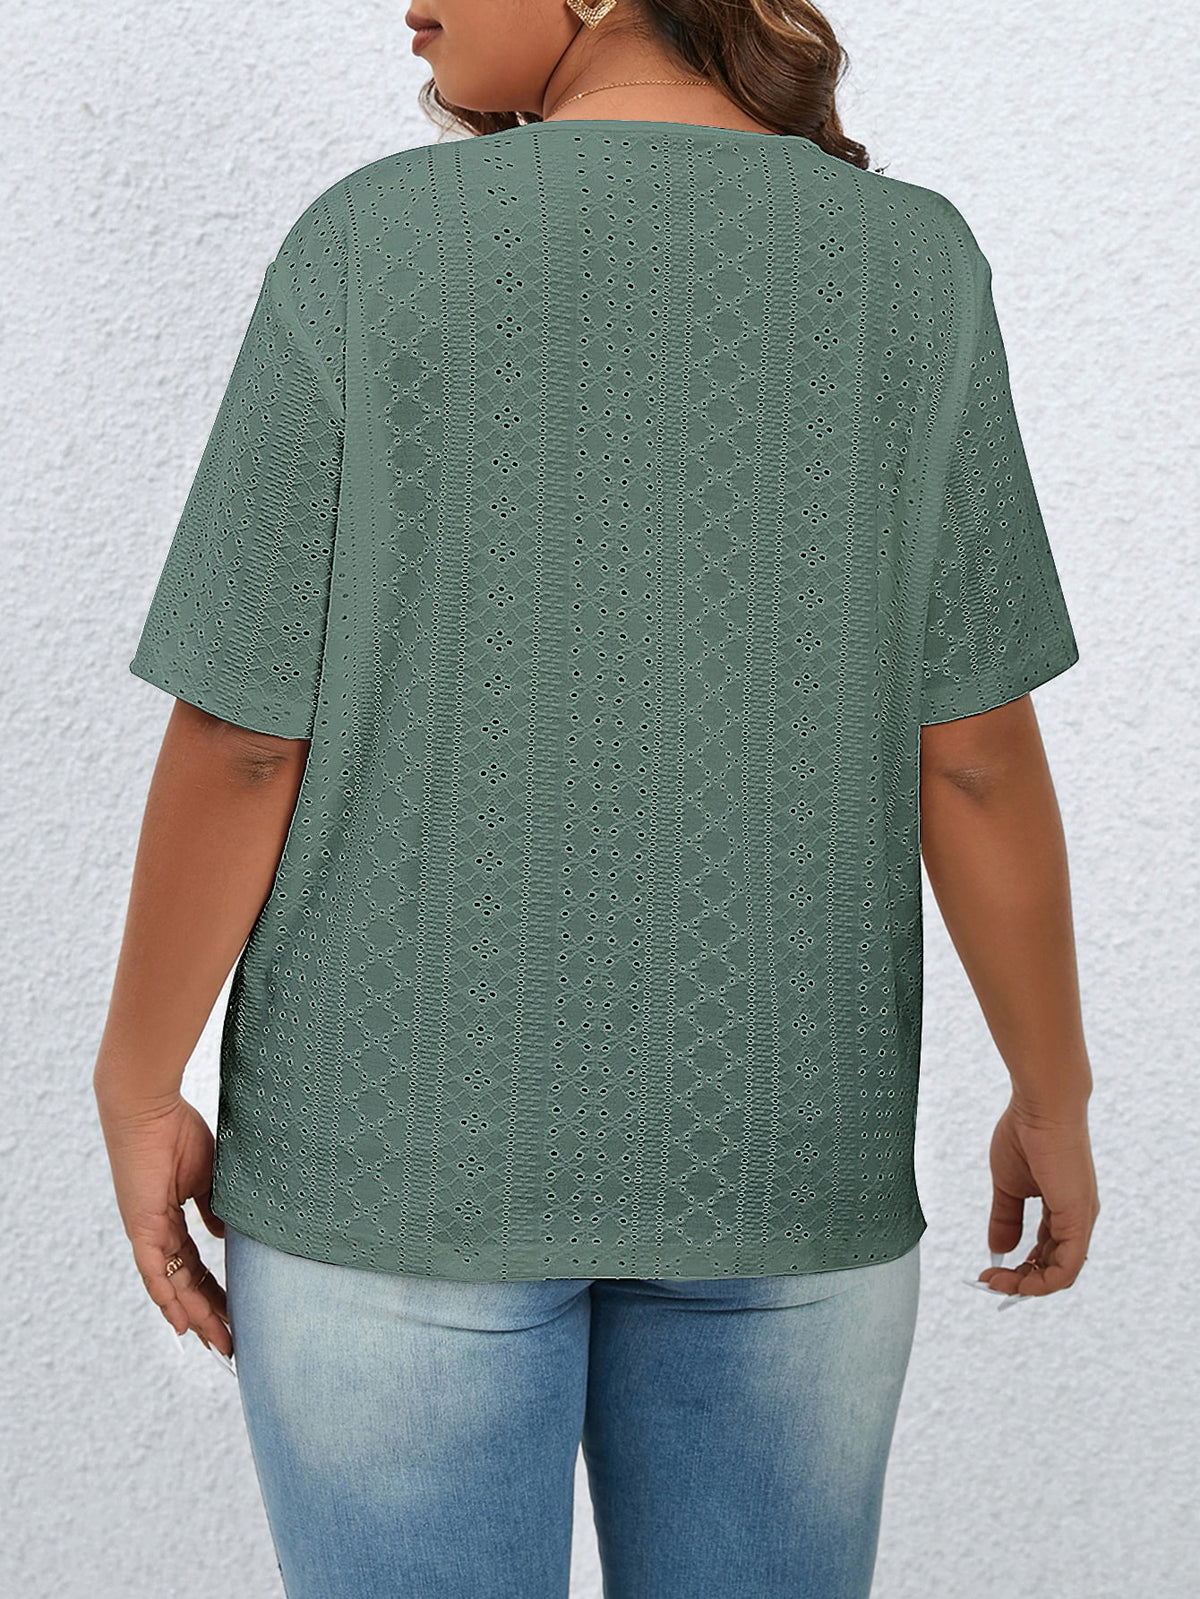 Plus Eyelet Embroidery Tee with Button Detail